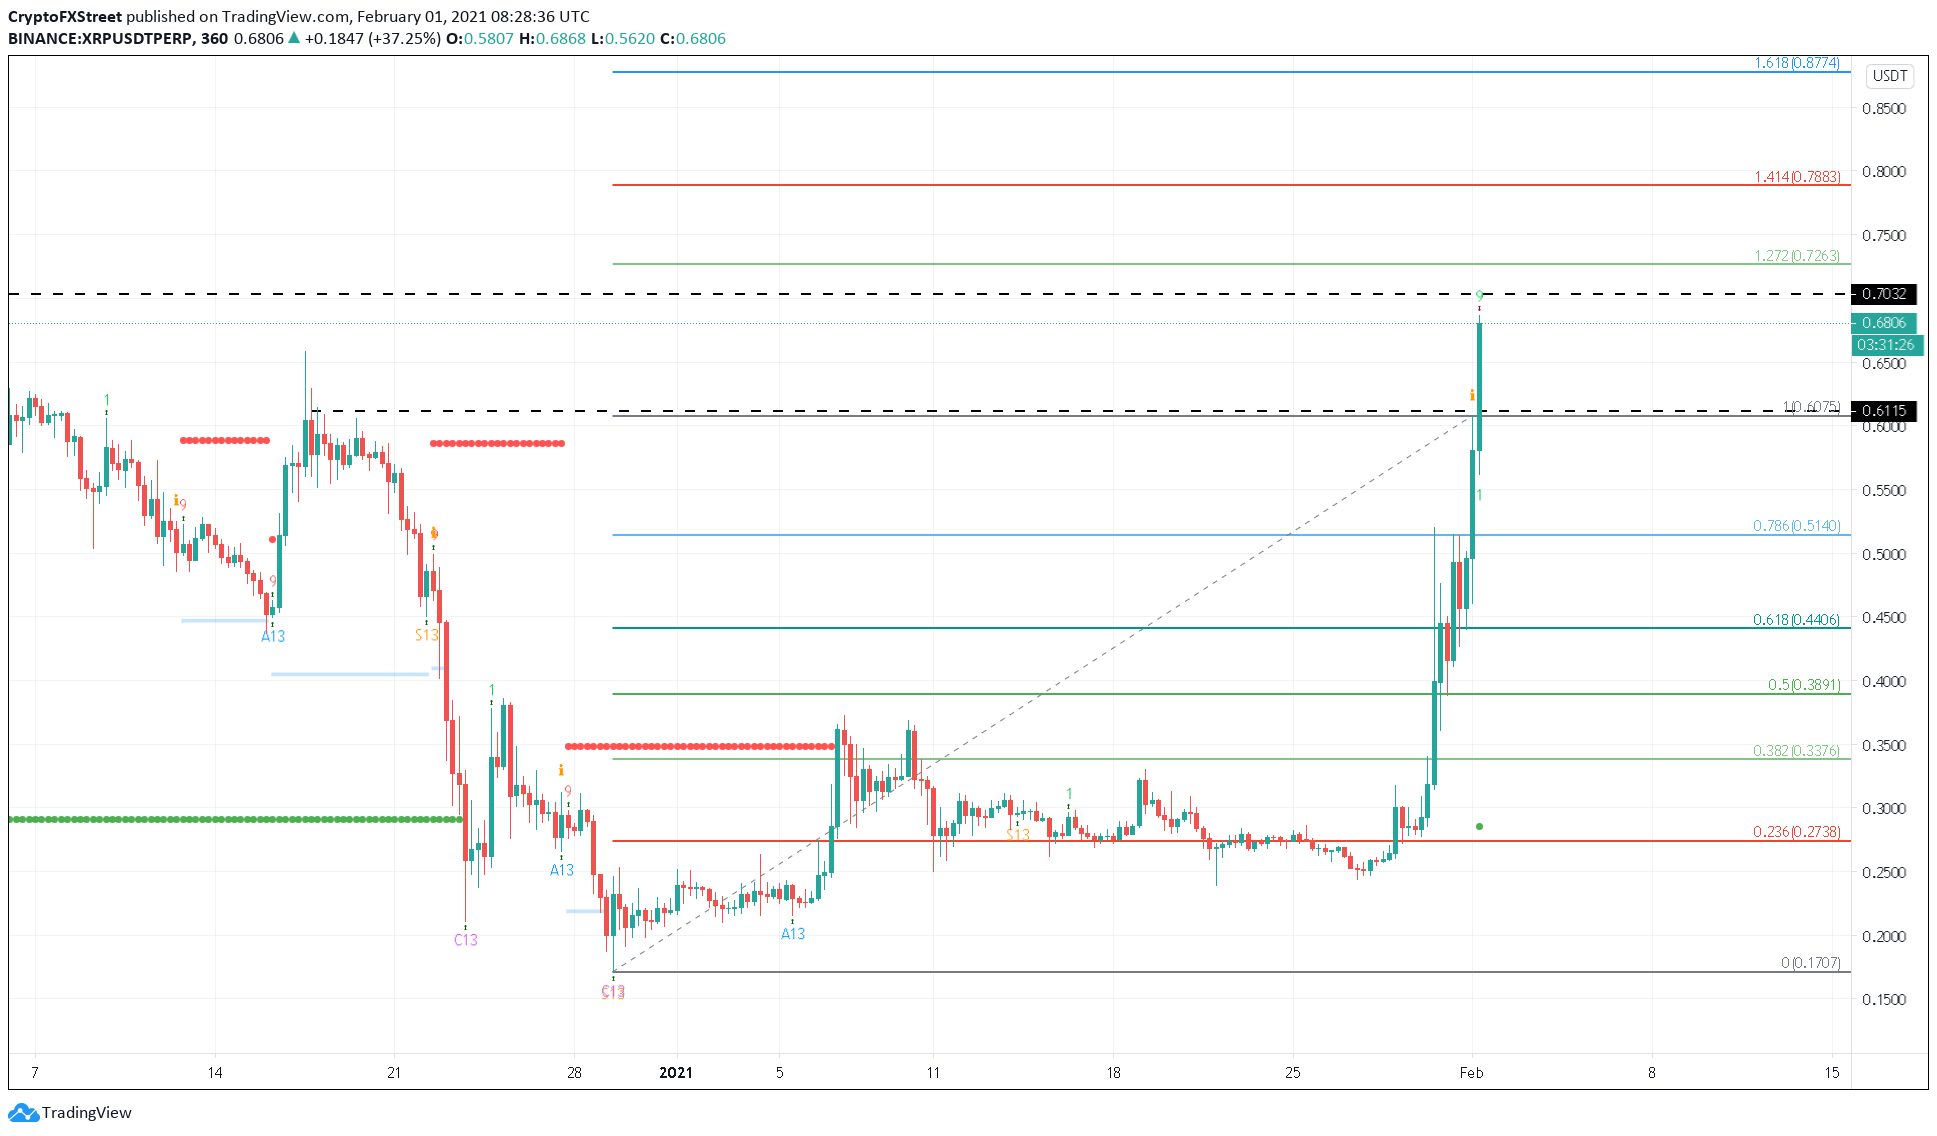 XRP/USD 6-hour chart